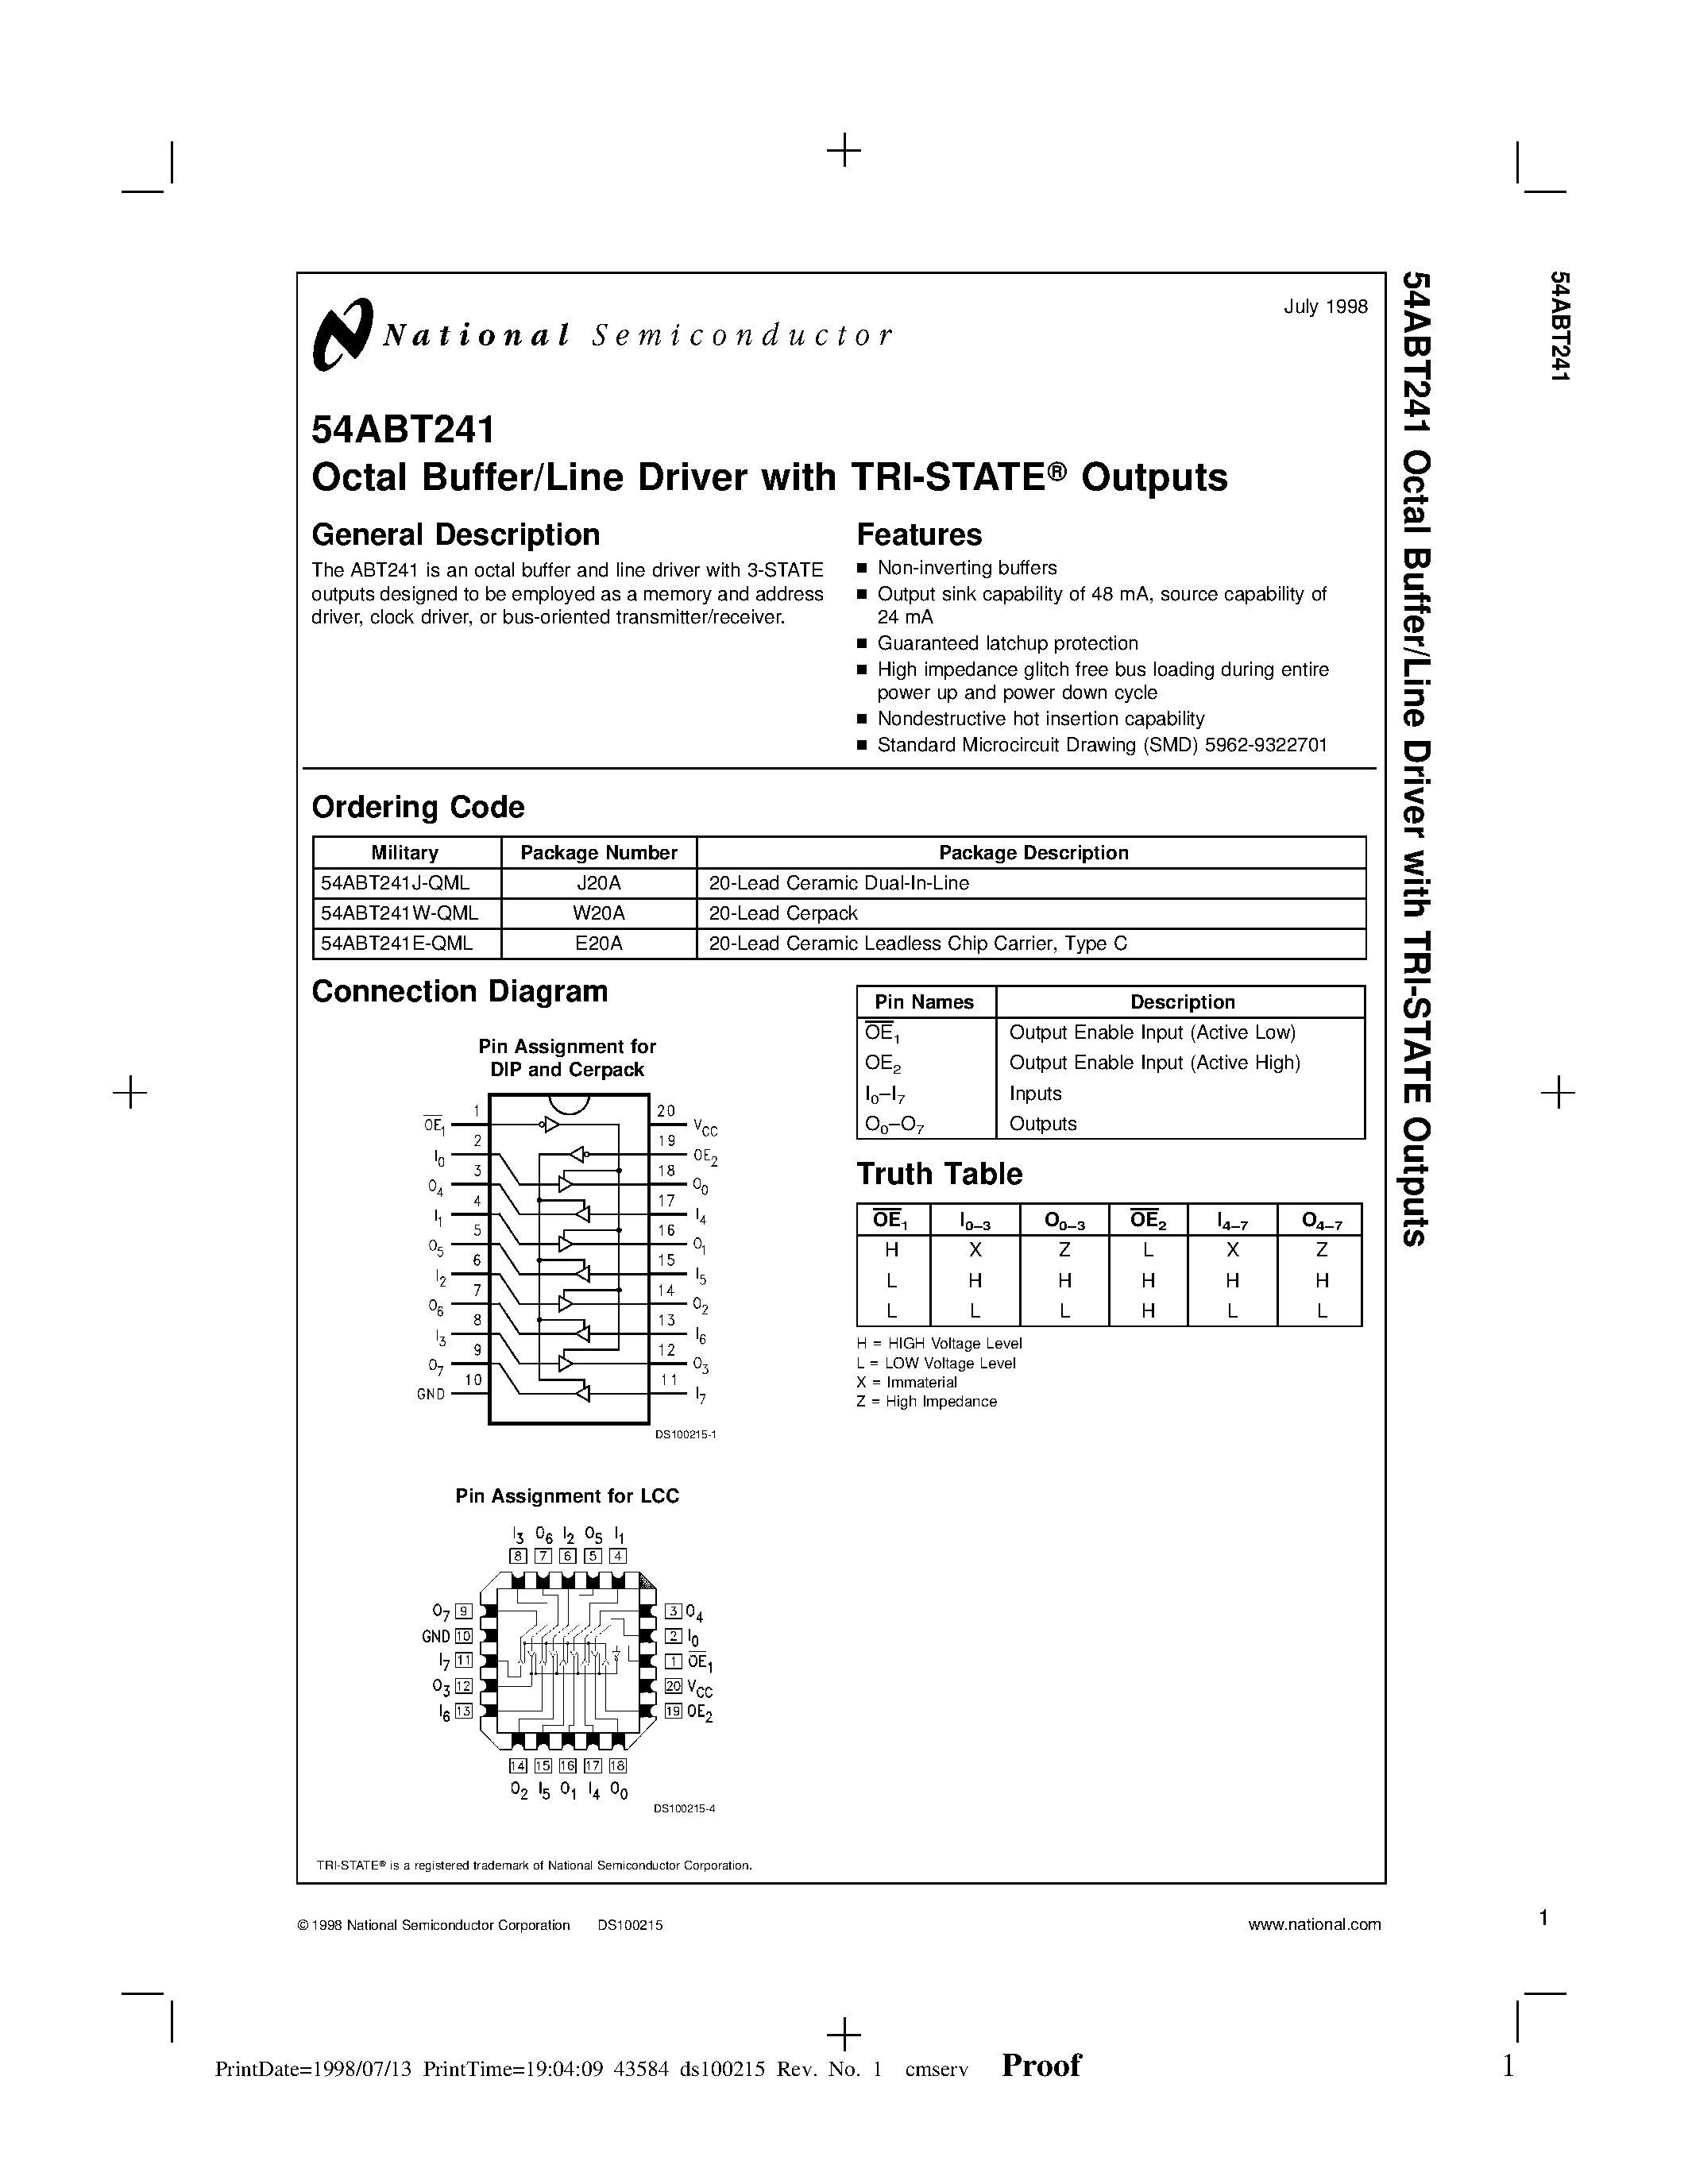 Datasheet 54ABT241 - Octal Buffer/Line Driver with TRI-STATE Outputs page 1